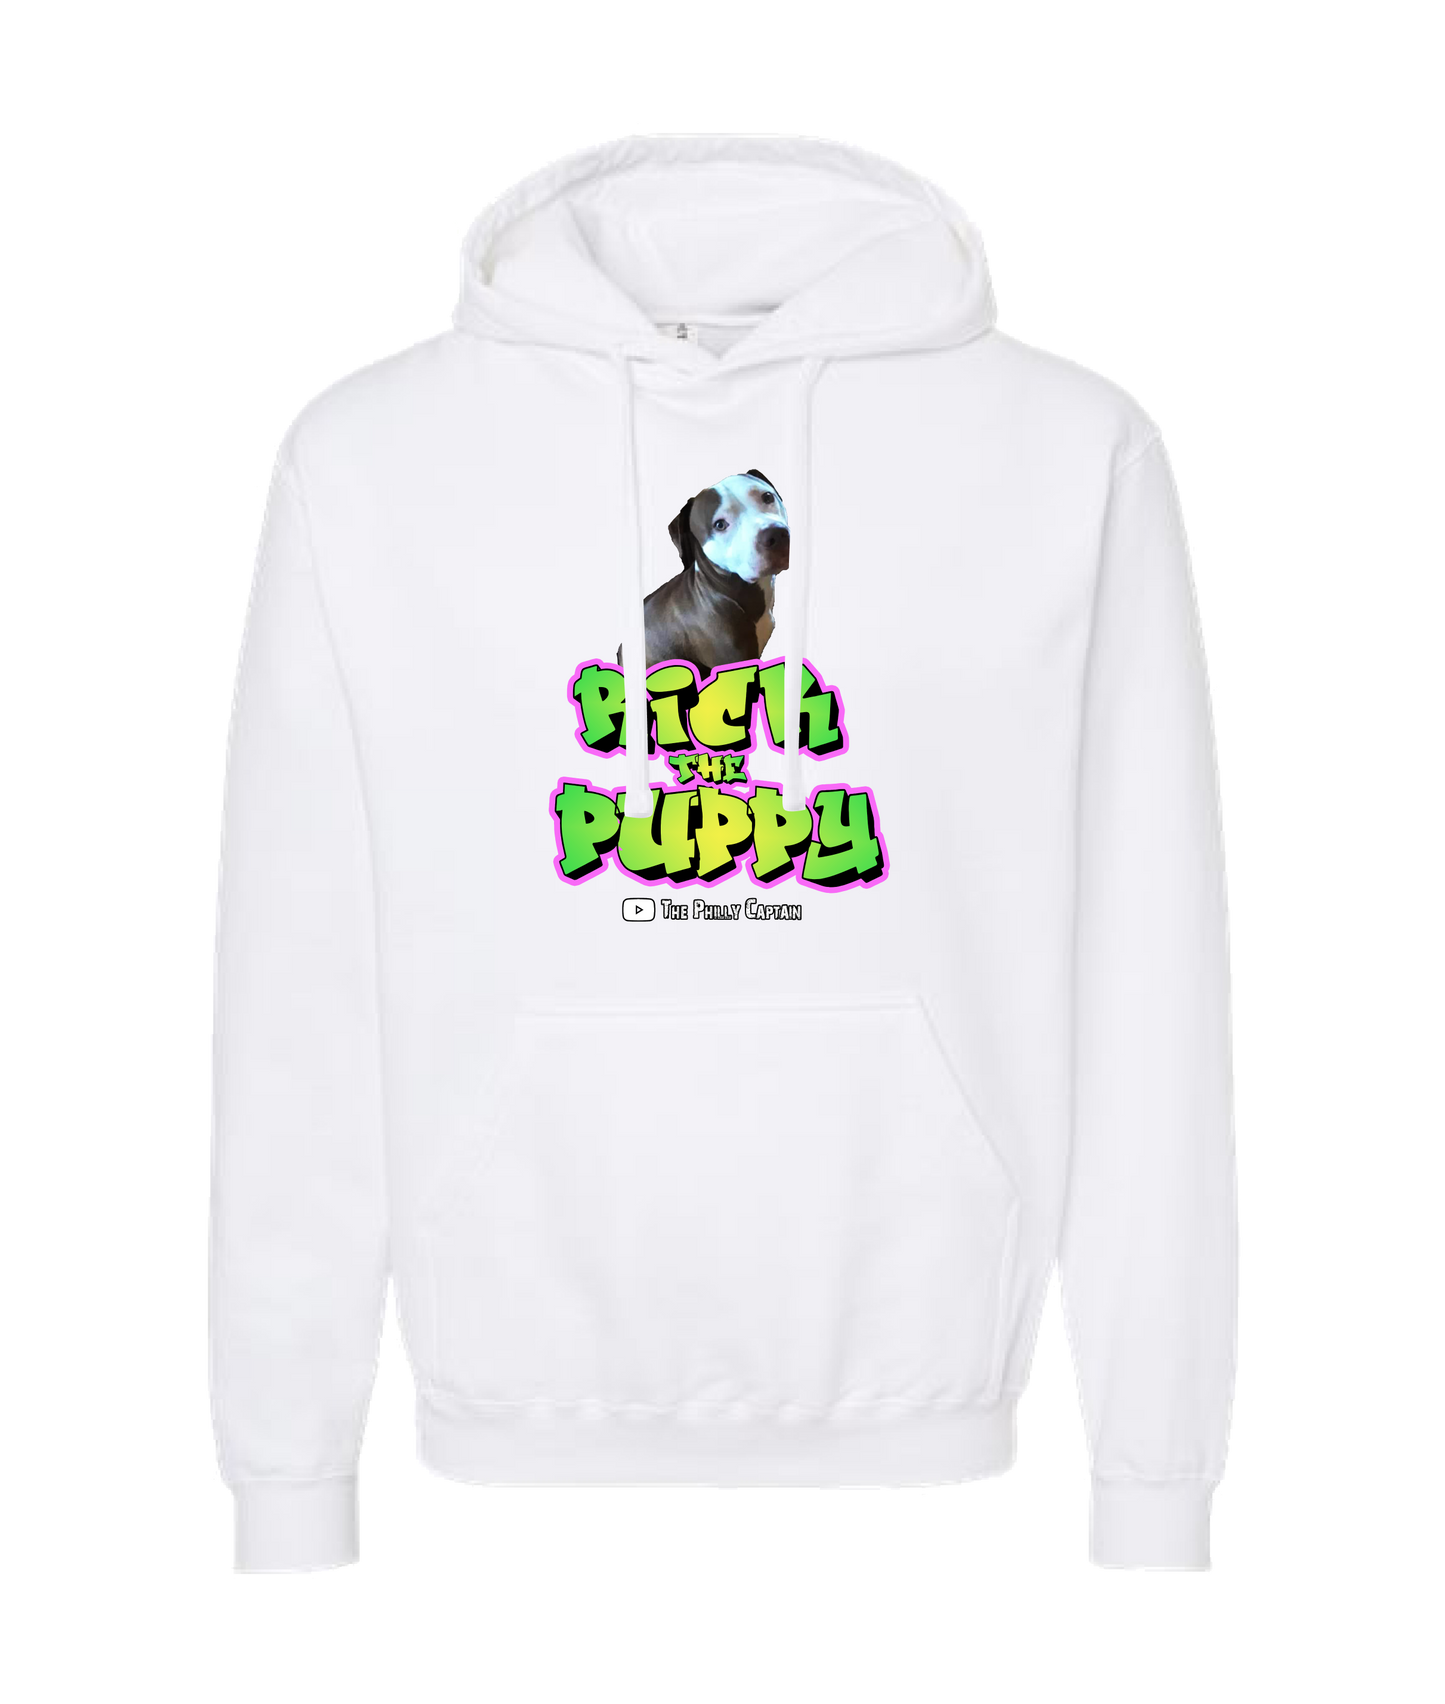 The Philly Captain's Merch is Fire - Rick the Puppy - White Hoodie